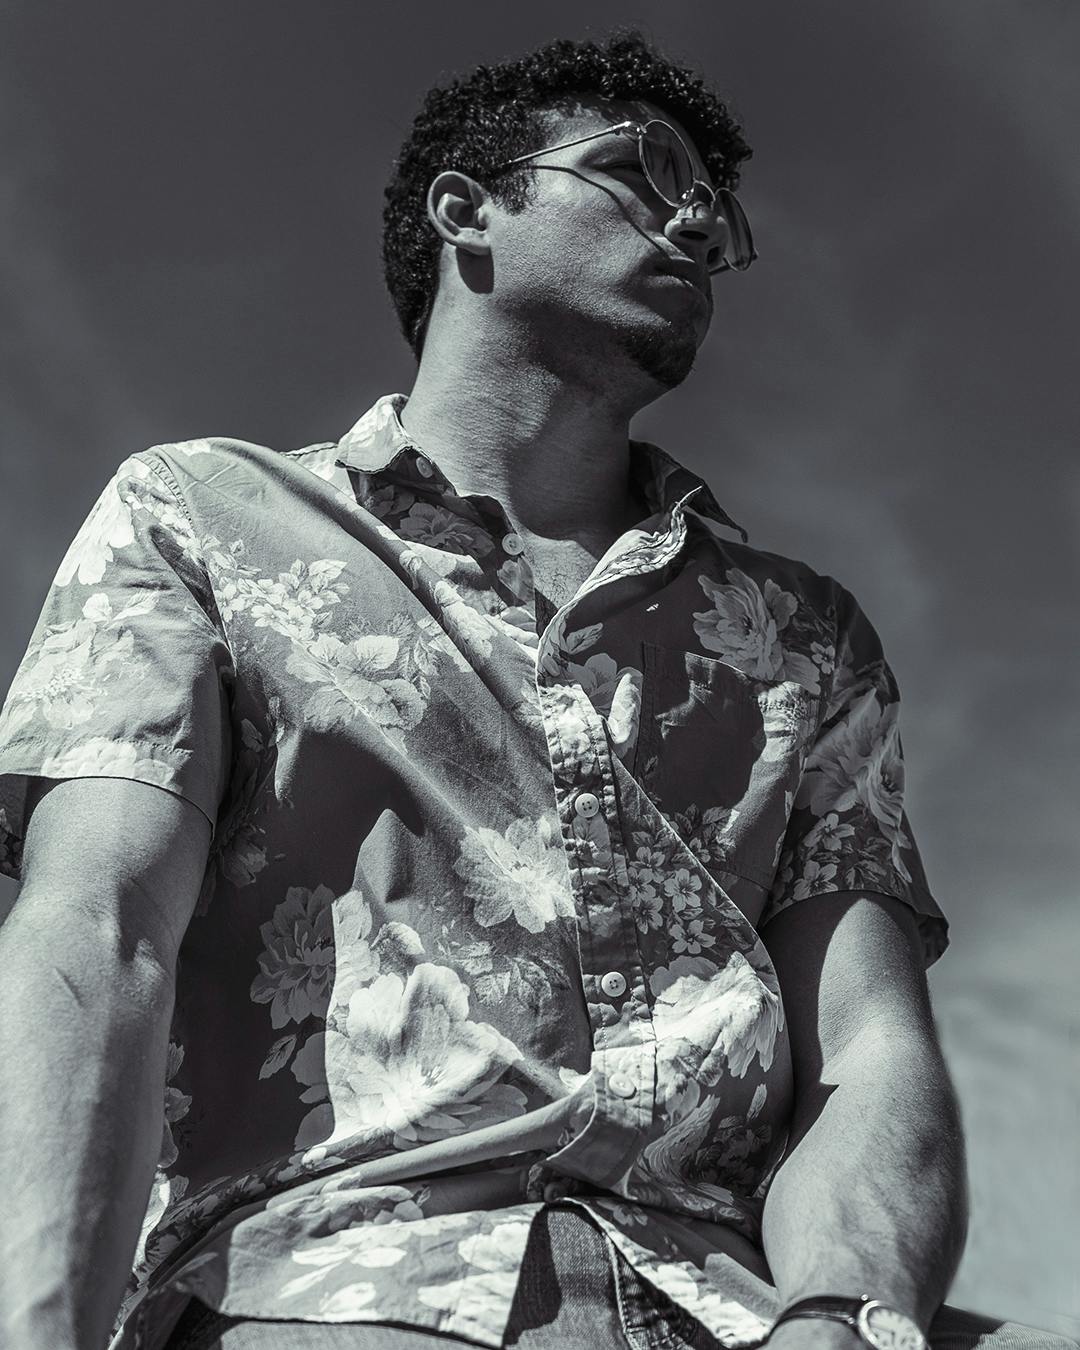 Black and white photo of man in flower shirt during hard light.